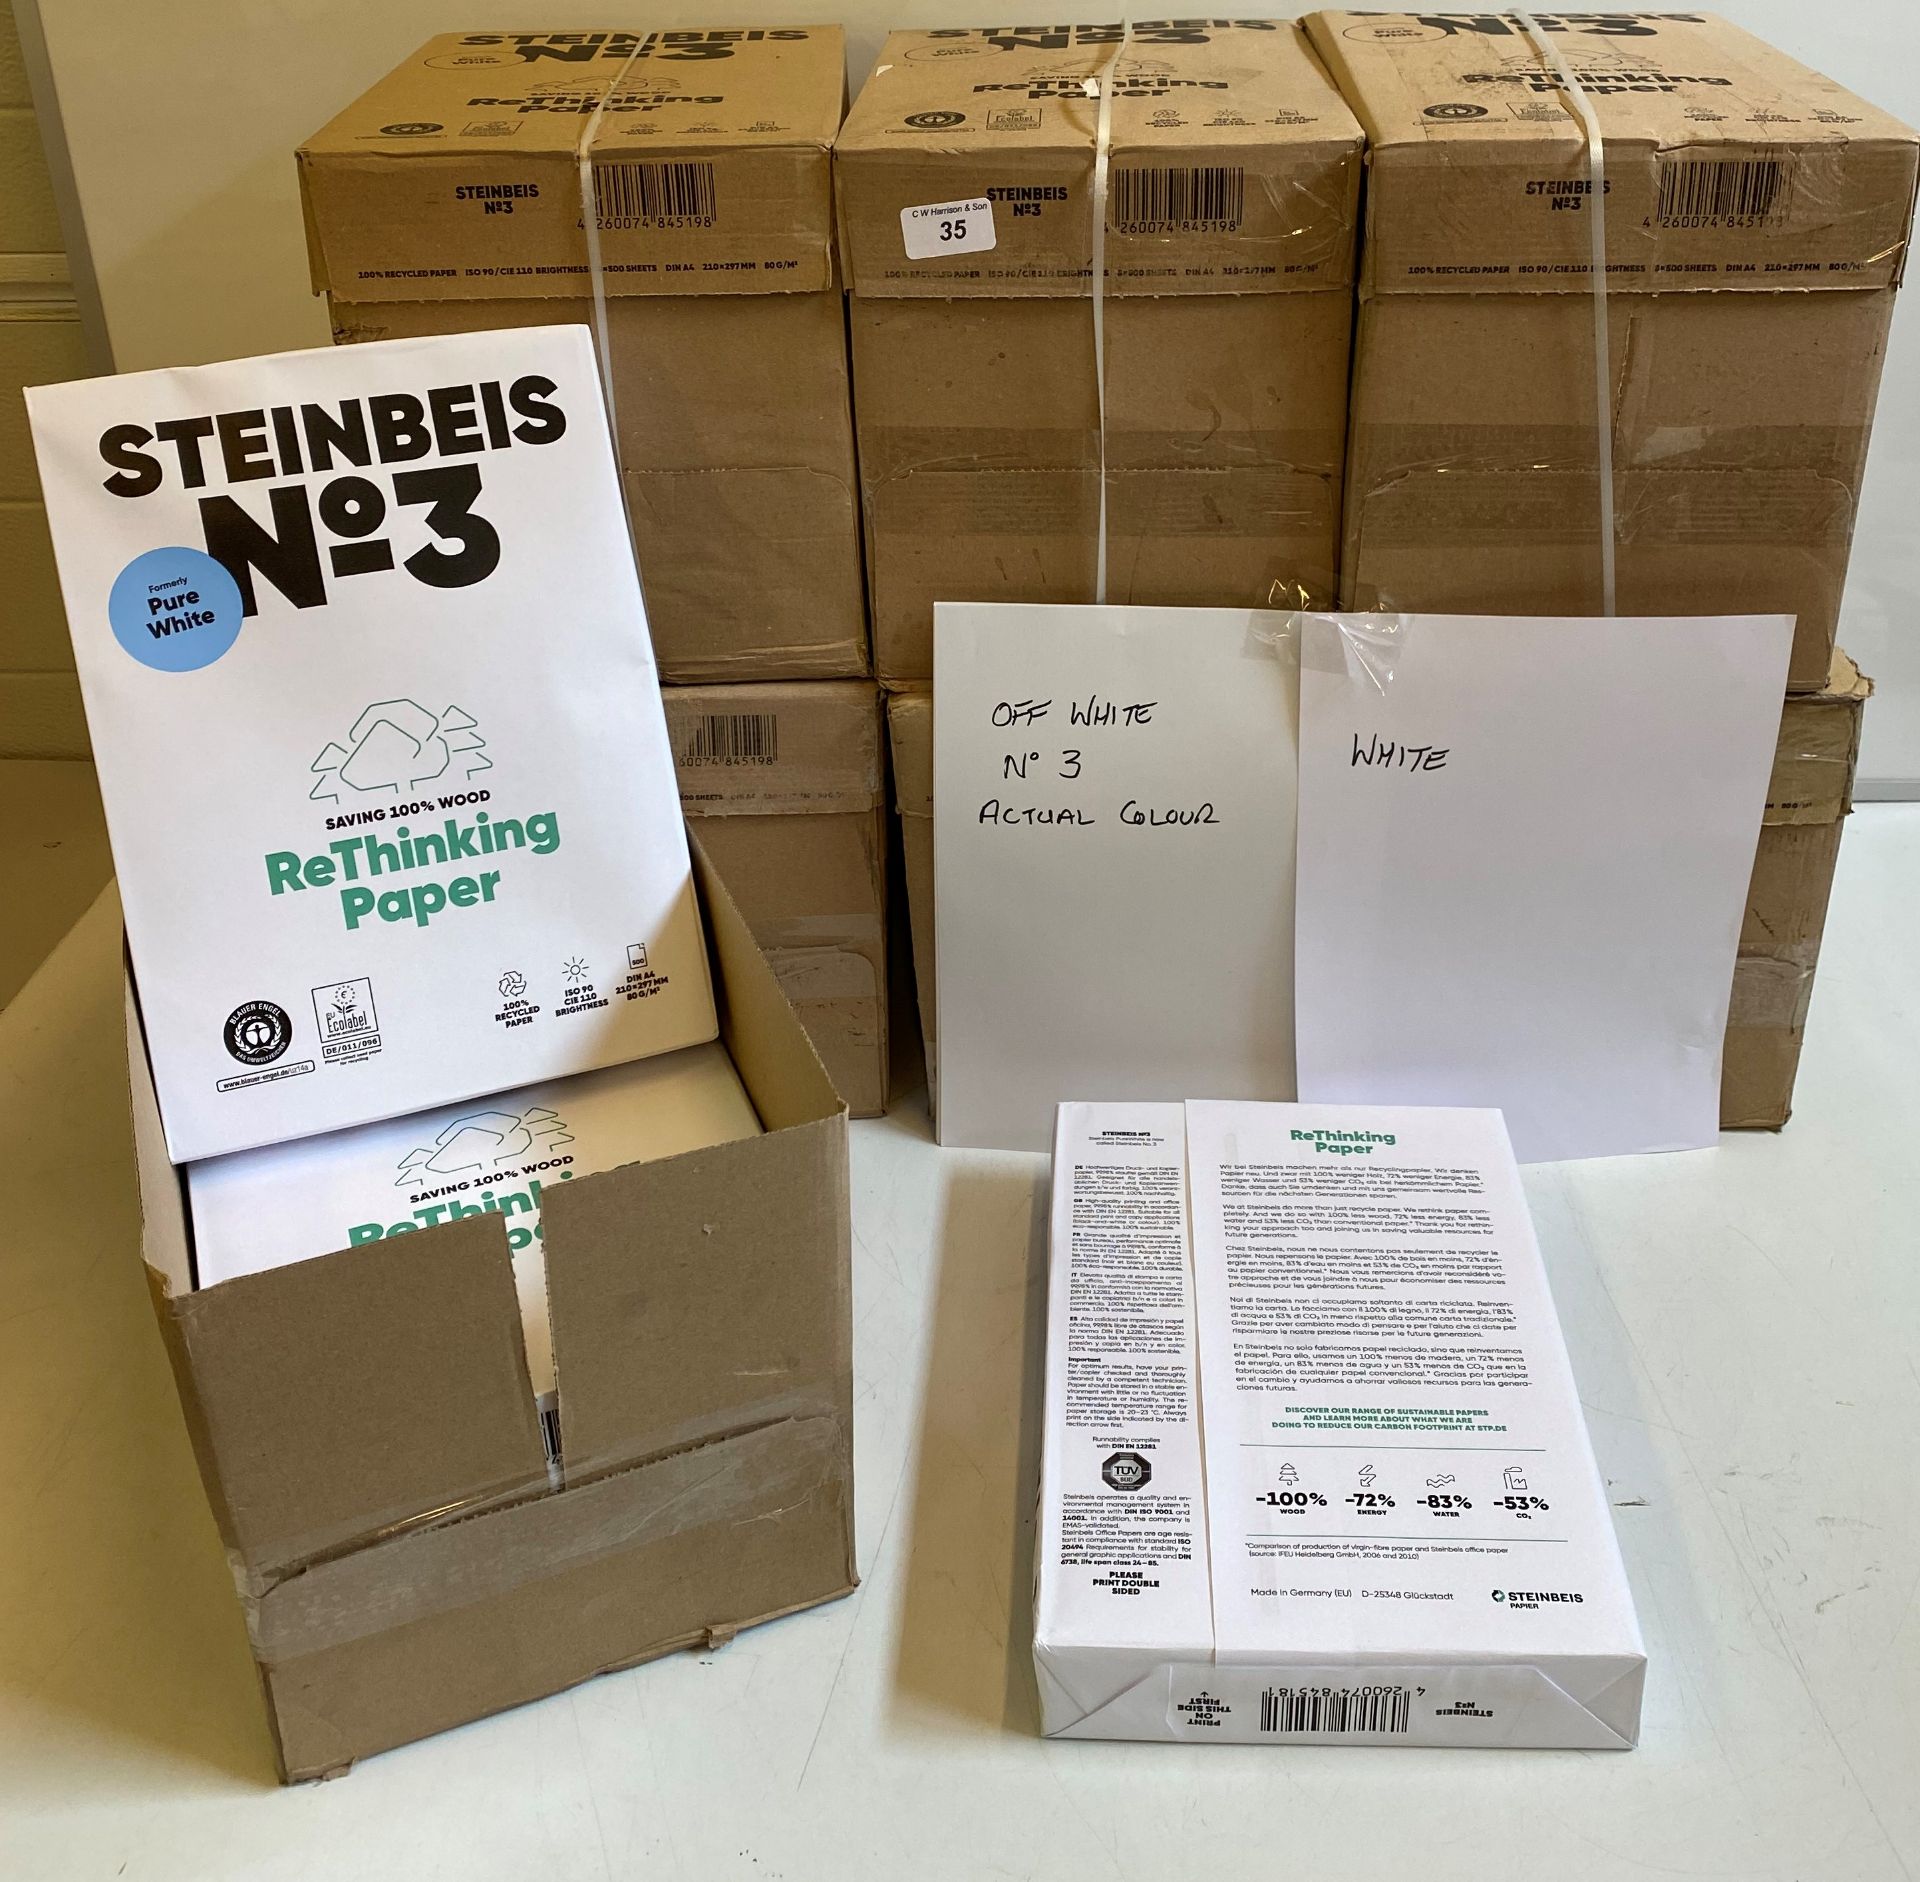 7 boxes of A4 Steinbeis off white recycled paper 80g (please see colour difference in picture)